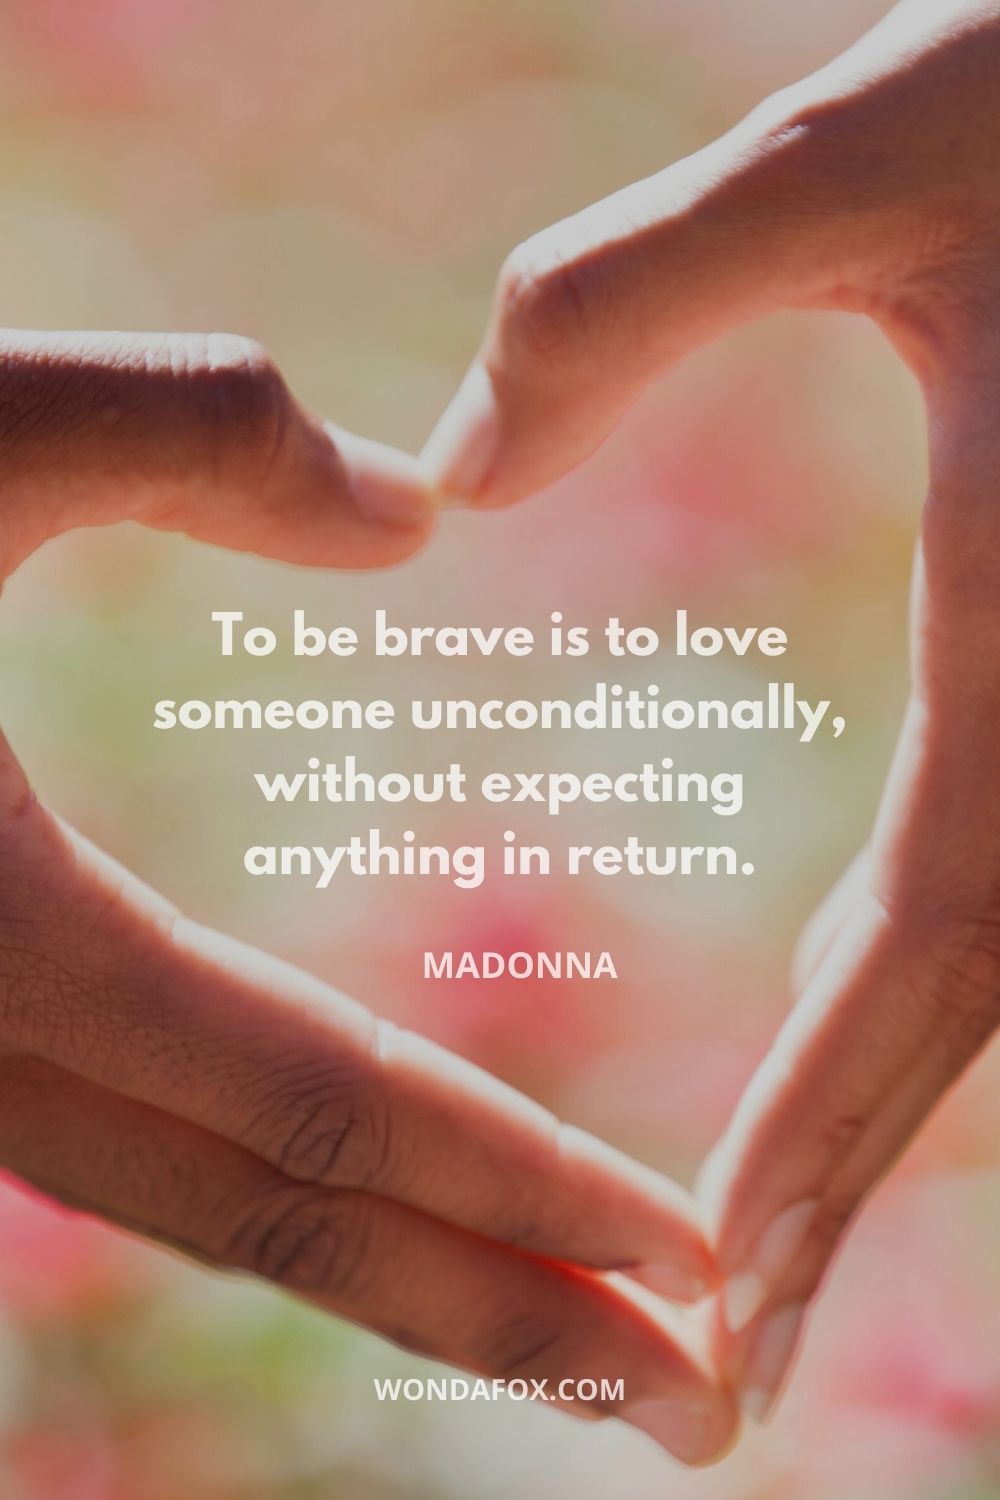 To be brave is to love someone unconditionally, without expecting anything in return.